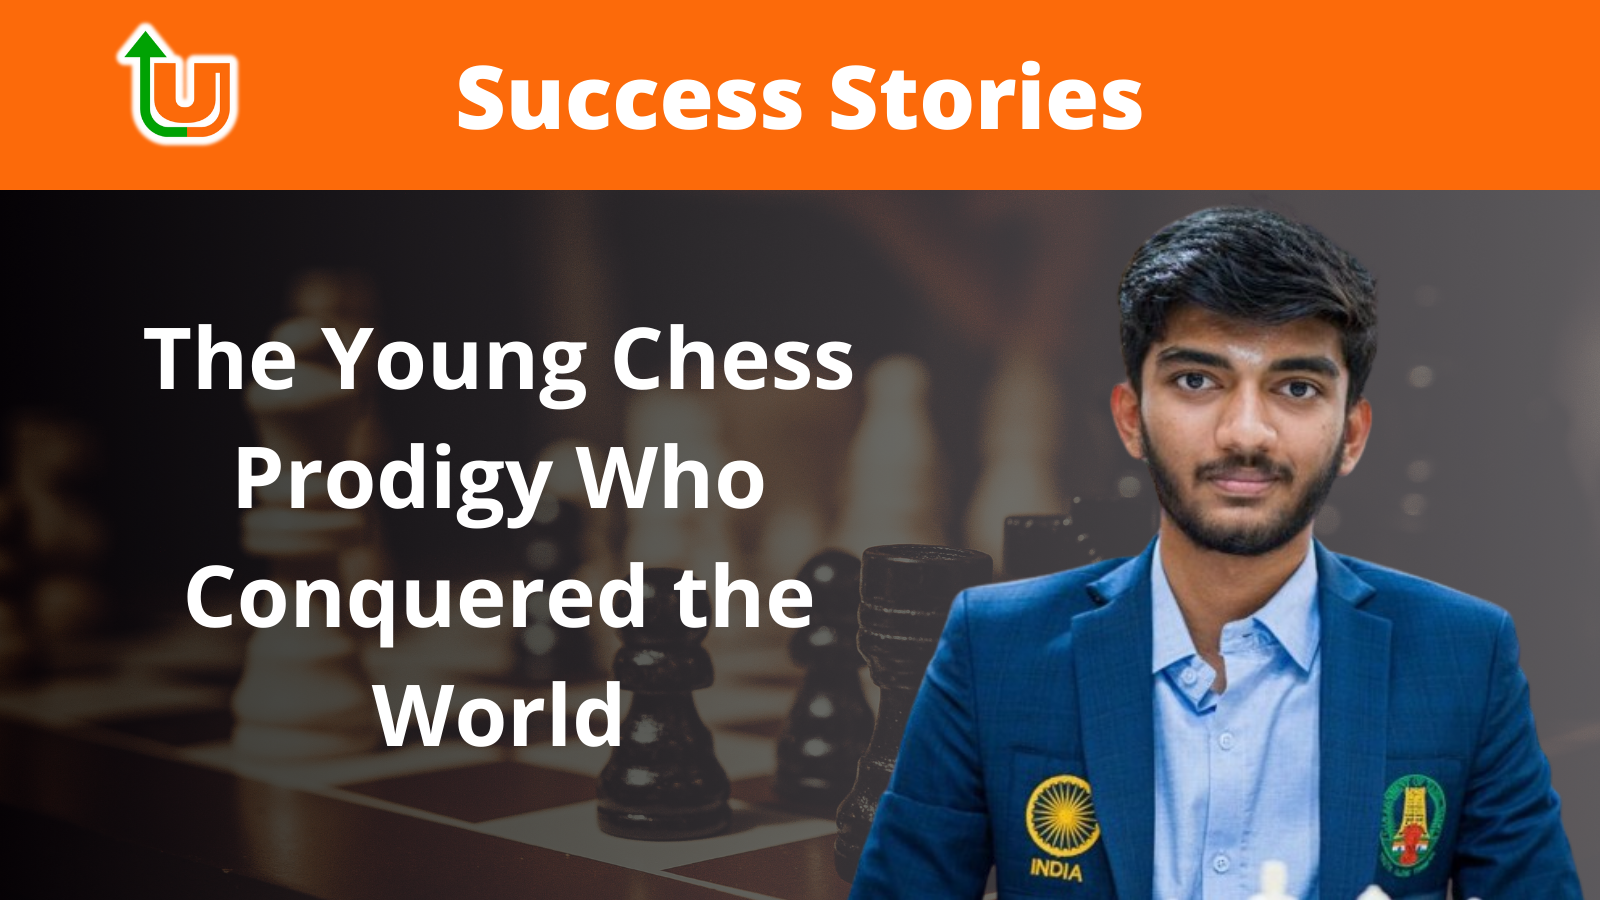 Gukesh D: The Young Chess Prodigy Who Conquered the World